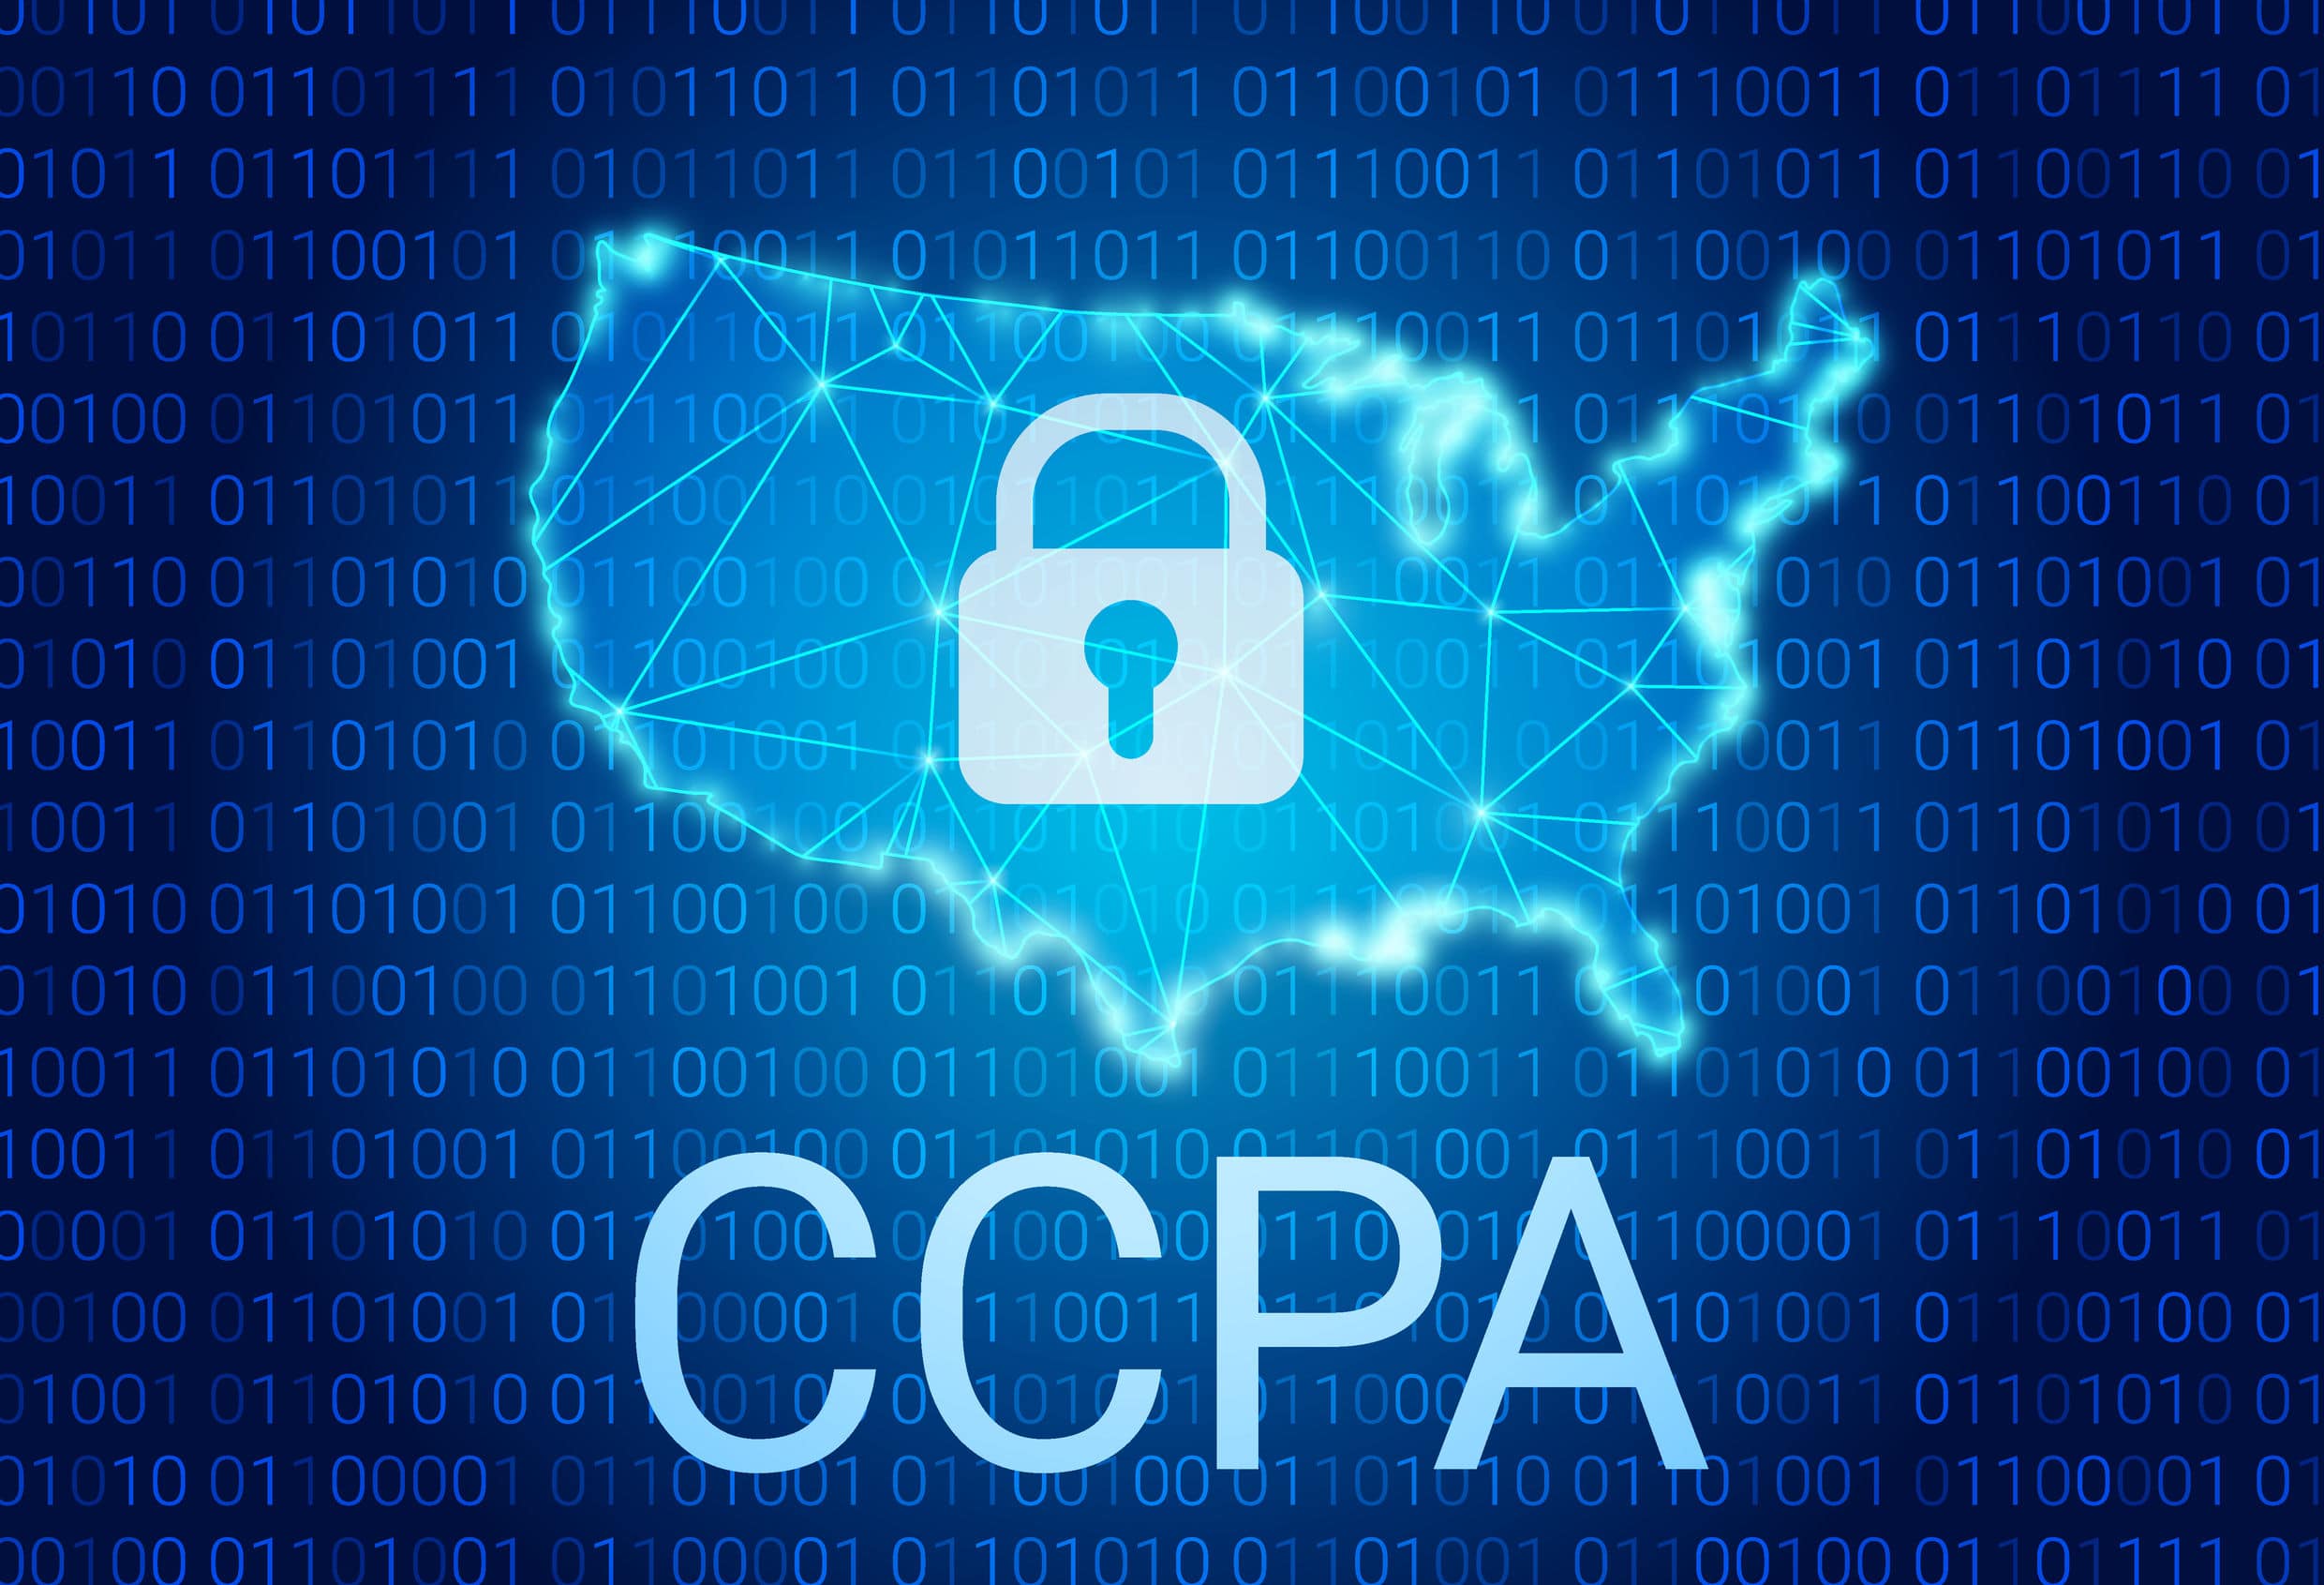 CCPA - California Consumer Privacy Act. vector background. Consumer protection for residents of California, United States. USA data security.